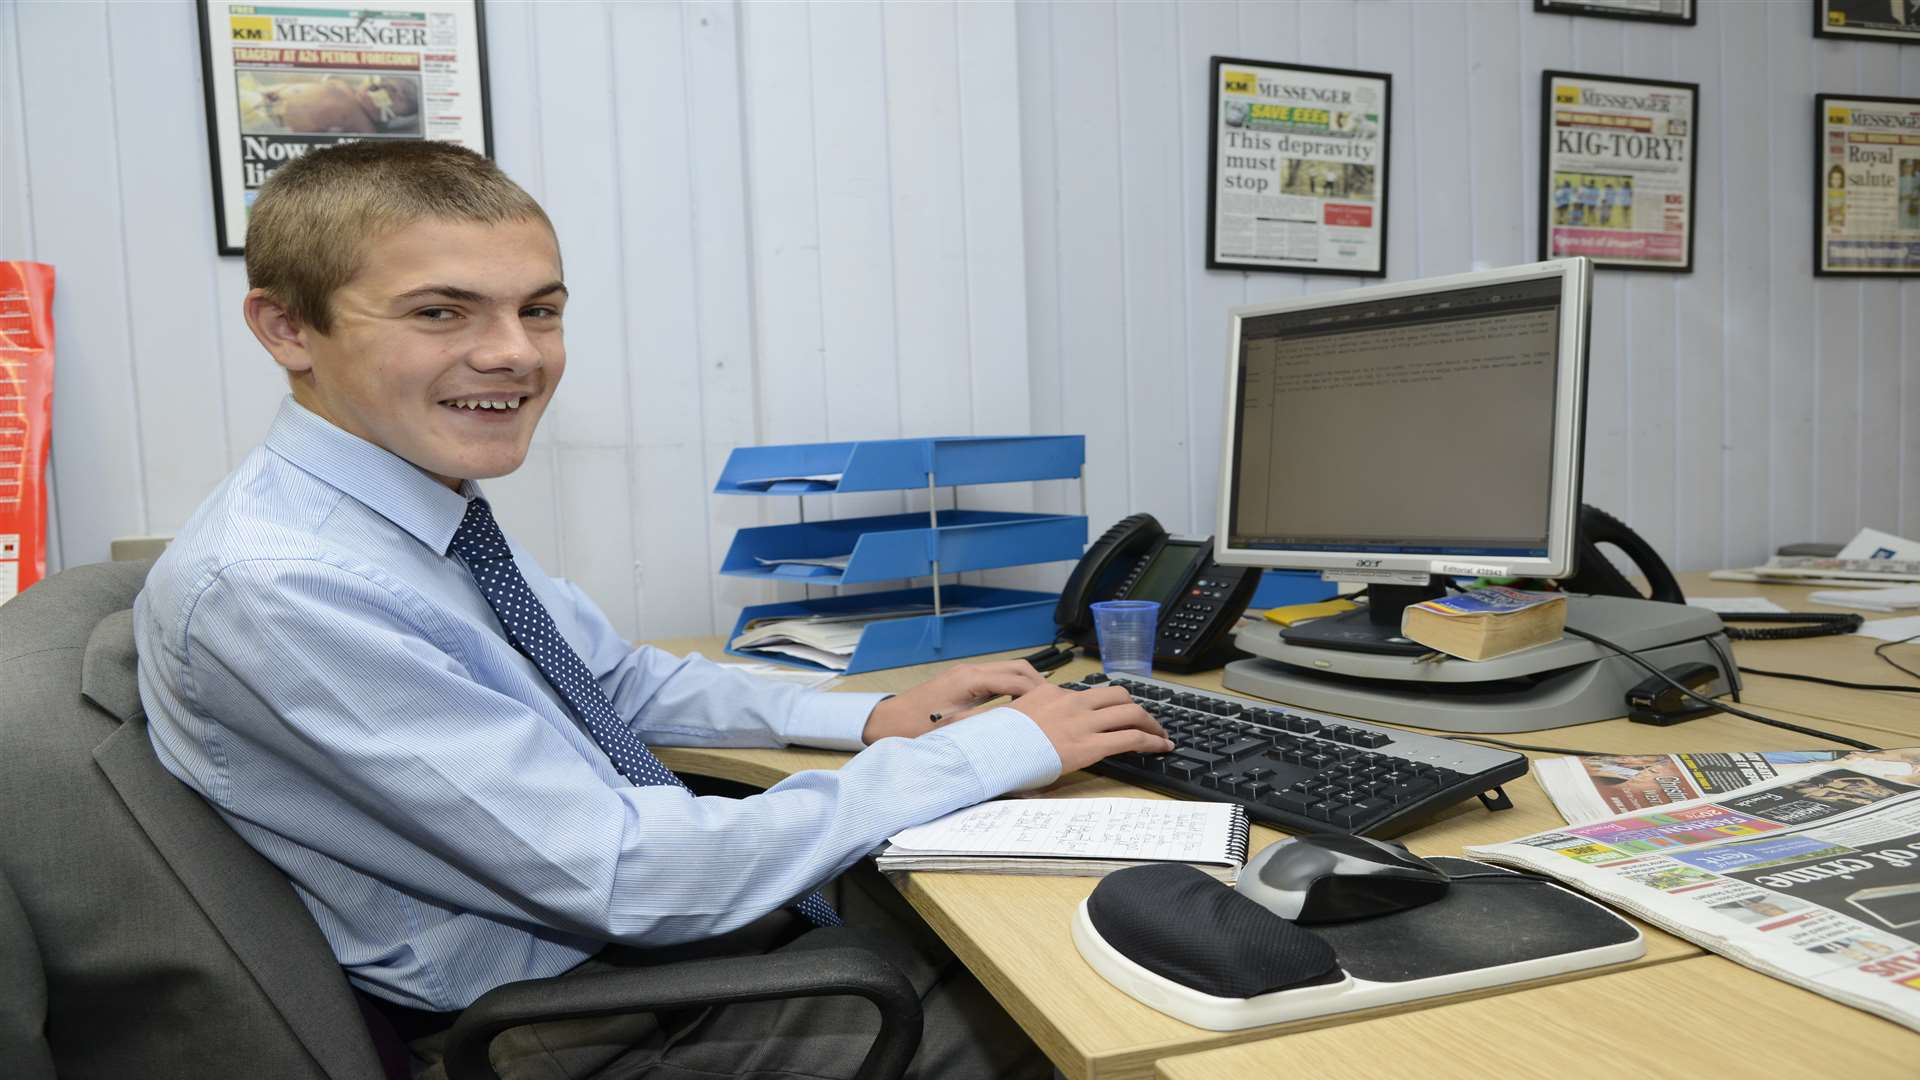 The KM Group's editorial apprentice Dan Wright works for press, radio and online